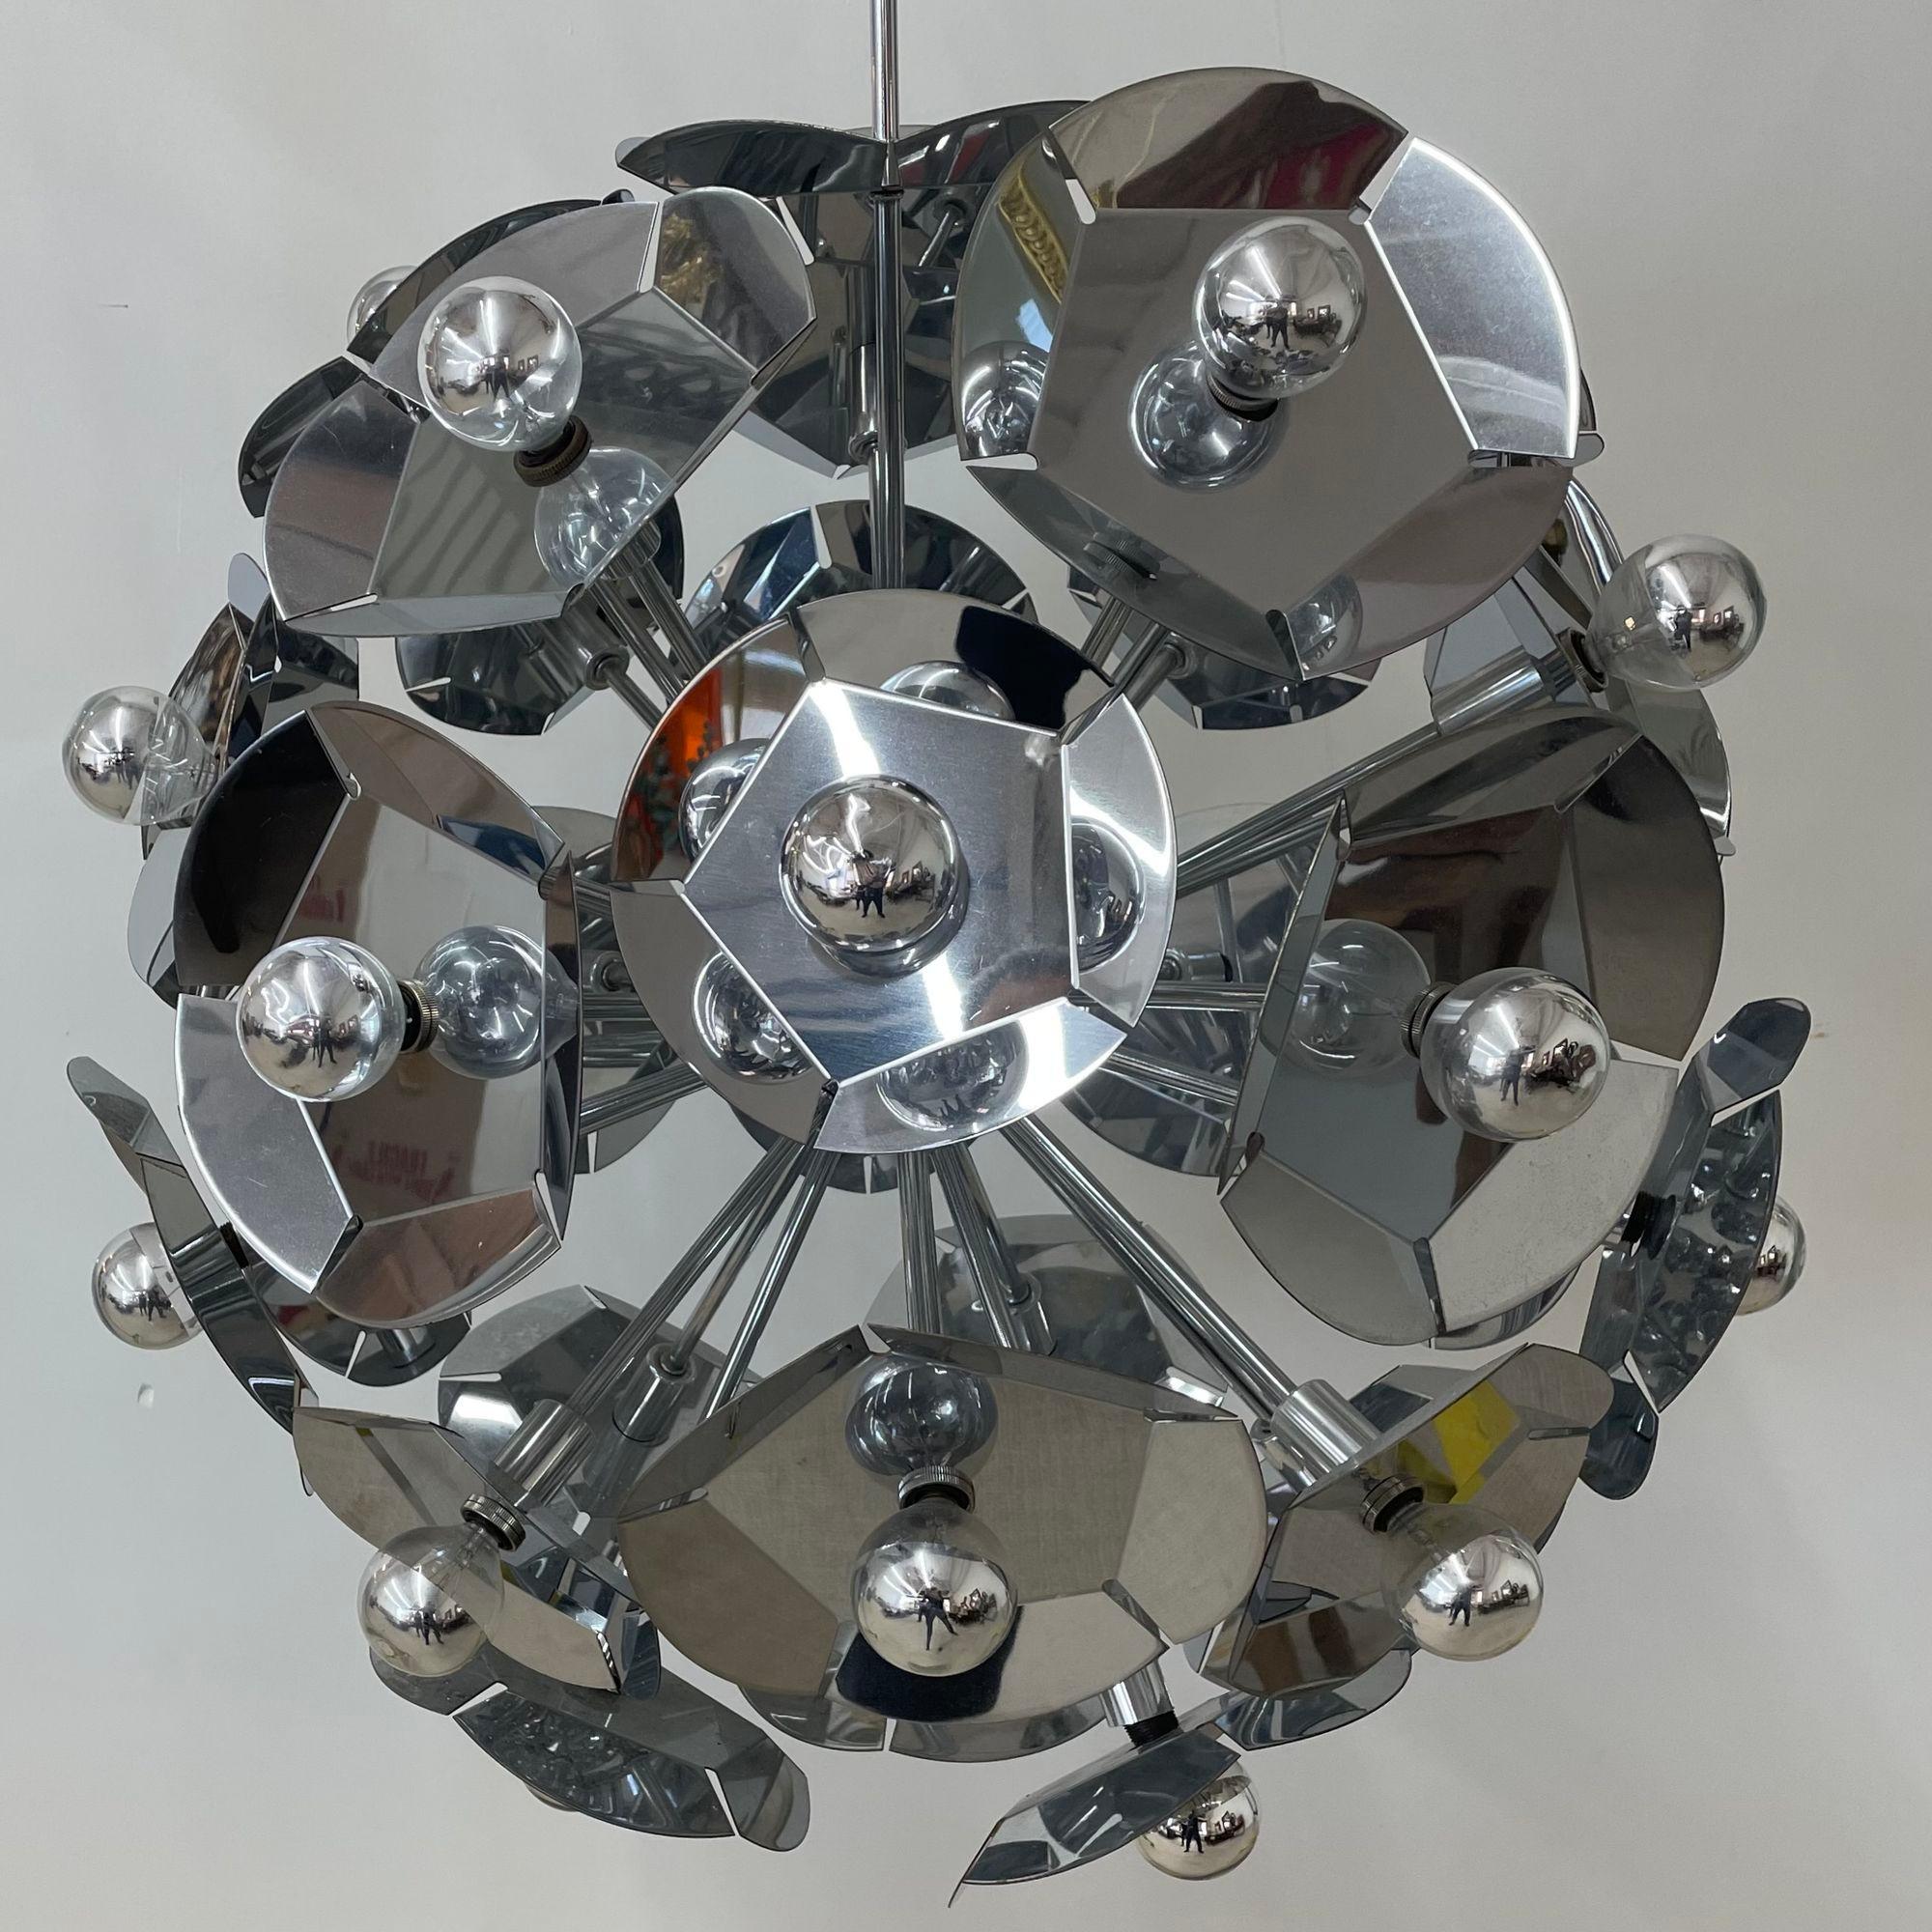 Large Italian Mid-Century Modern Sputnik Style Flower Chandelier, Round, Chrome In Good Condition For Sale In Stamford, CT